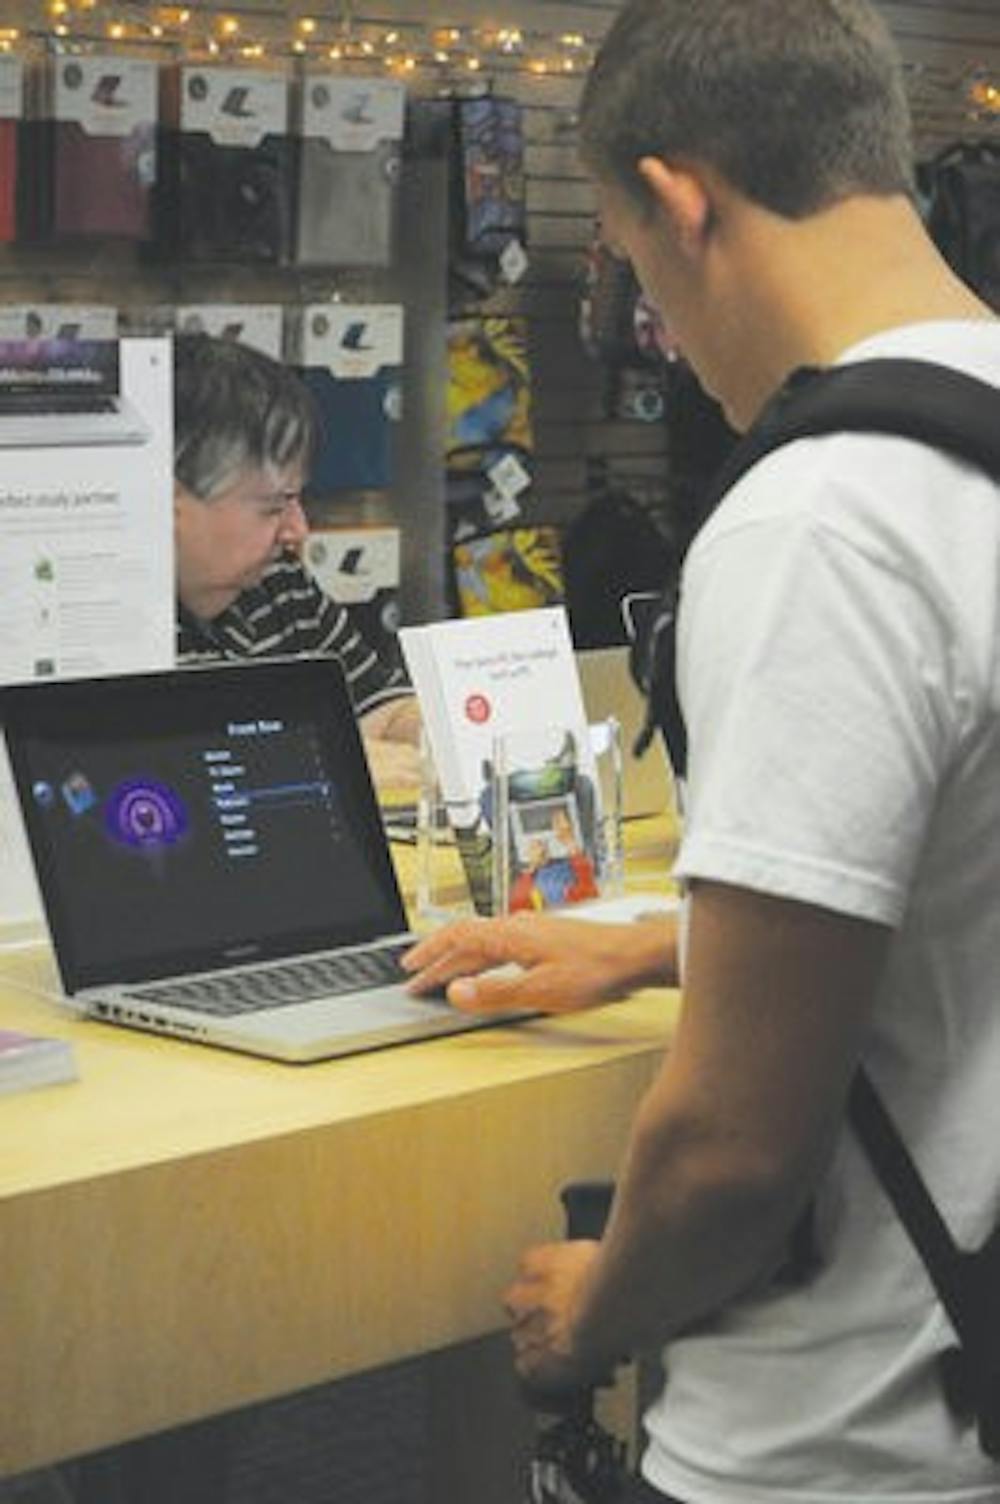 Jimmy Cooper, sophomore in supply chain and aviation management, looks at a computer in the Mac store on campus. (Christen Harned / ASSISTANT PHOTO EDITOR)